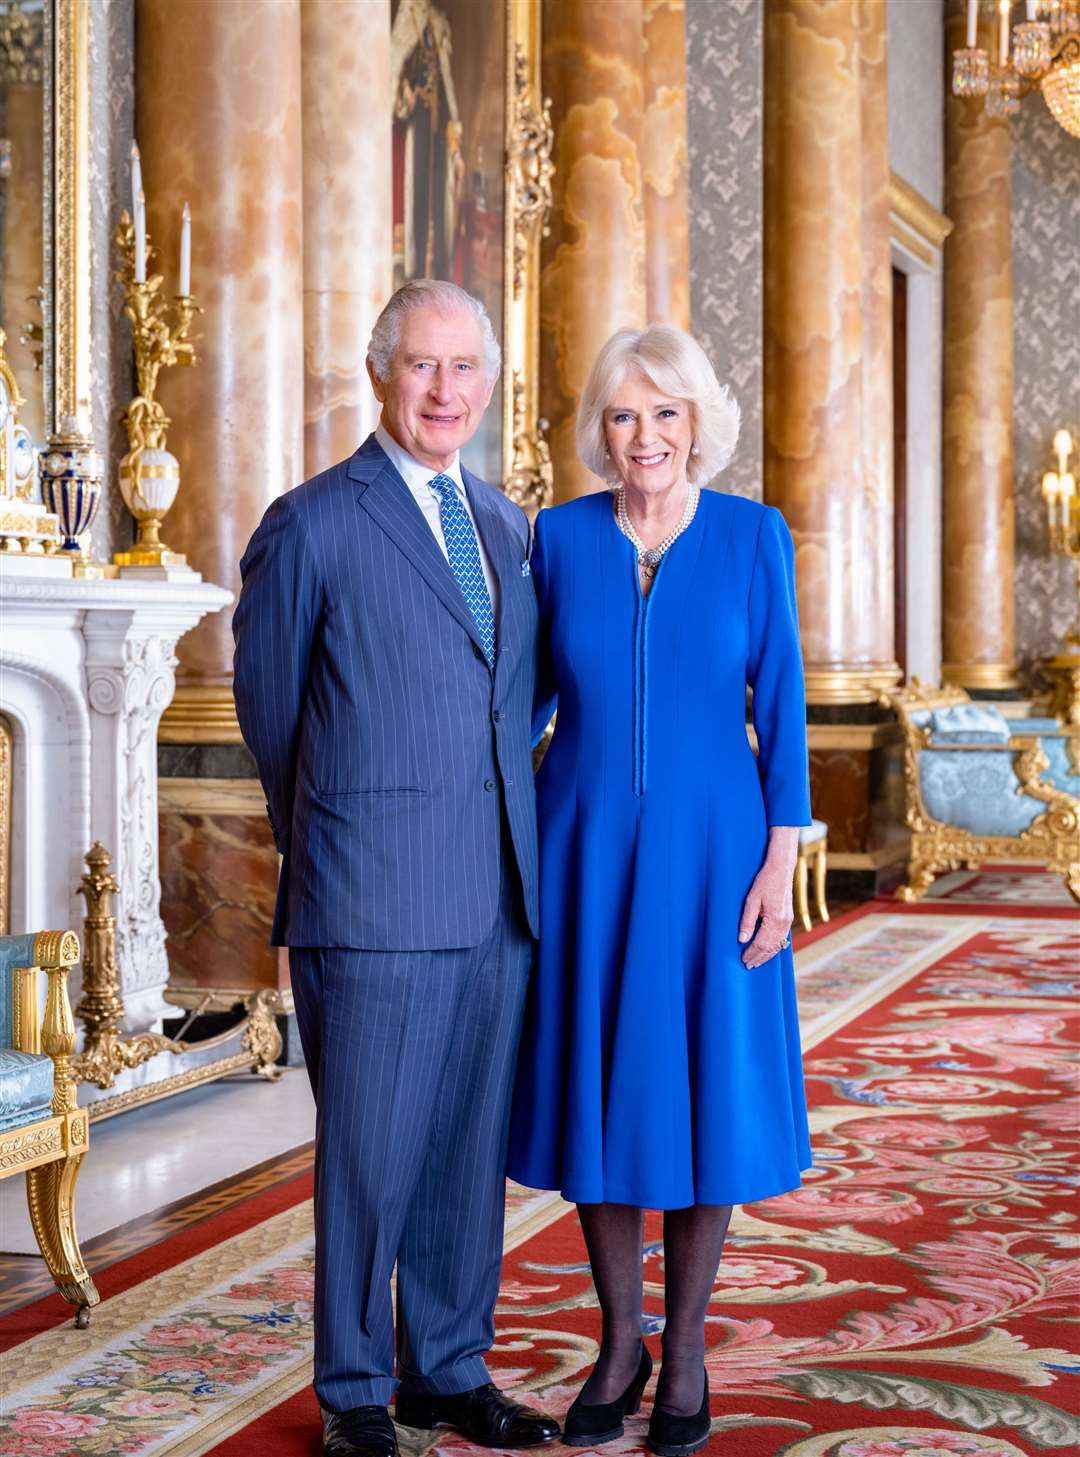 The King and Queen Consort. Picture: Hugo Burnand/Royal Household/PA NOT TO BE USED AFTER MAY 9, 2023